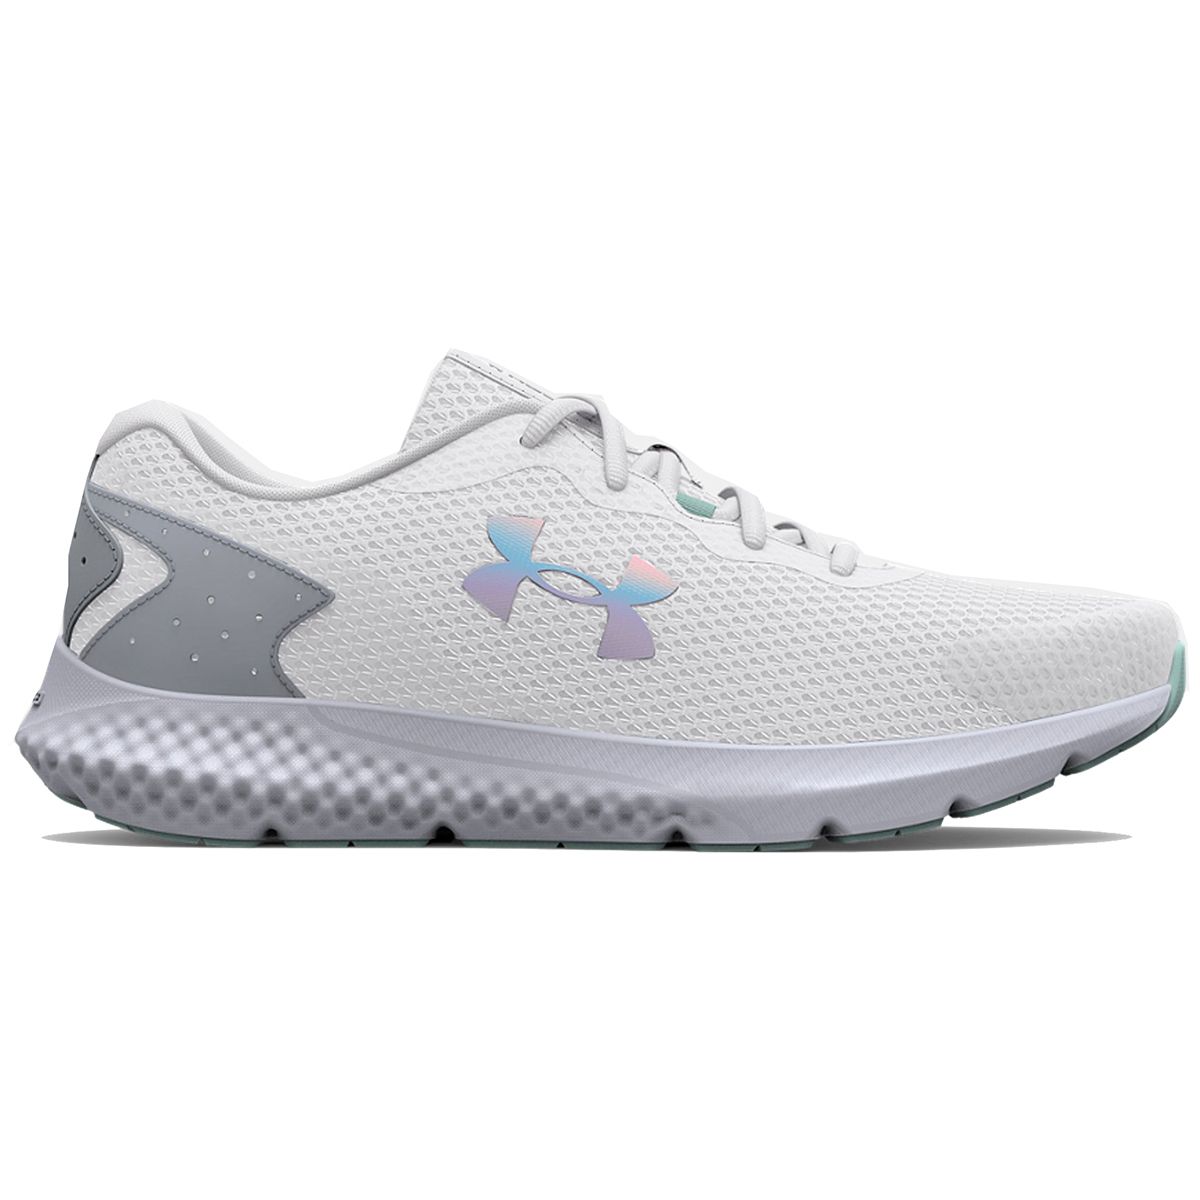 Under Armour Charged Rogue 3 Iridescent Women's Running Shoe